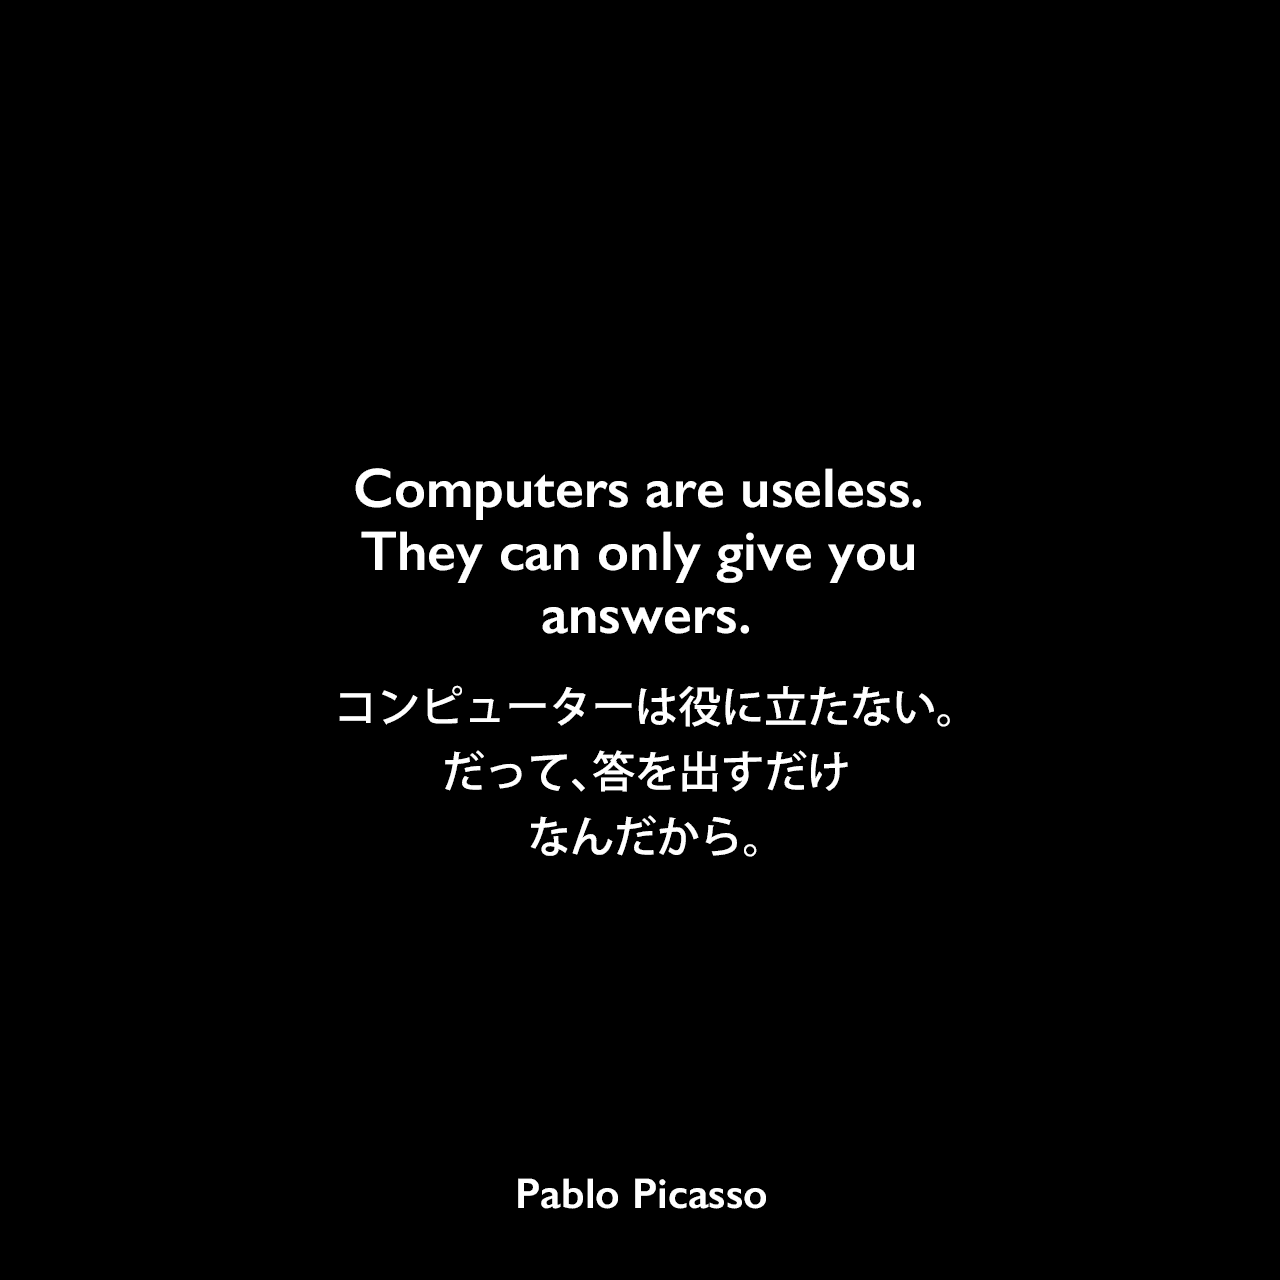 Computers are useless. They can only give you answers.コンピューターは役に立たない。だって、答を出すだけなんだから。- William Fifieldによるインタビュー「The Paris Review」よりPablo Picasso